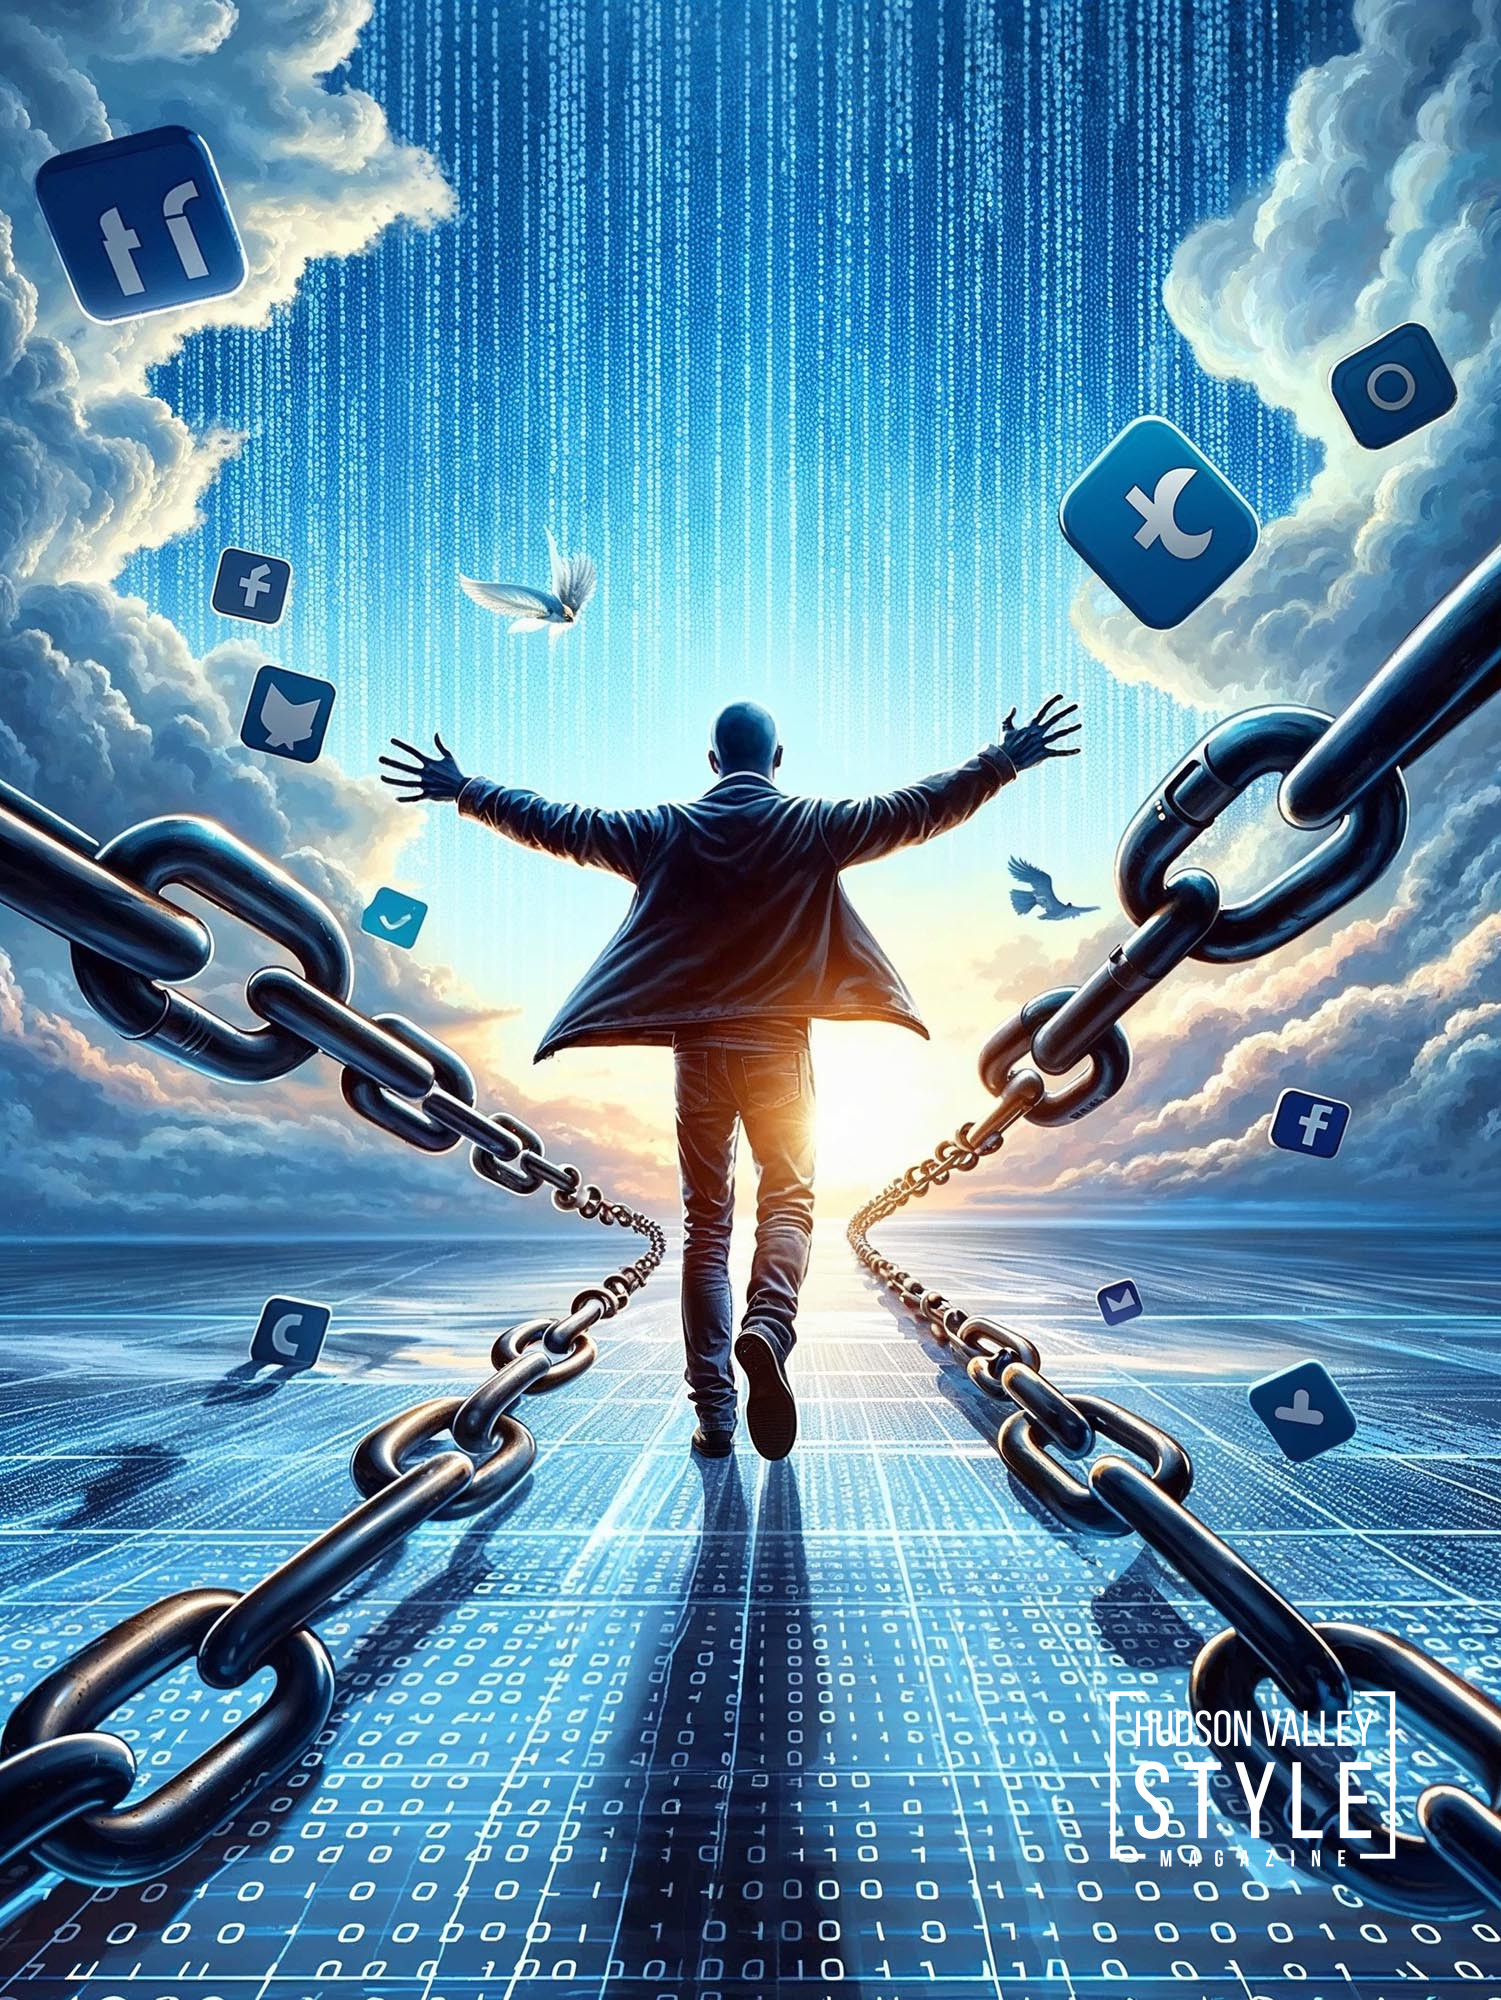 Breaking Free: Embracing the New Era of the Internet Beyond the Gated Social Media Empires – by Maxwell Alexander, MA, BFA, EIC, Hudson Valley Style Magazine